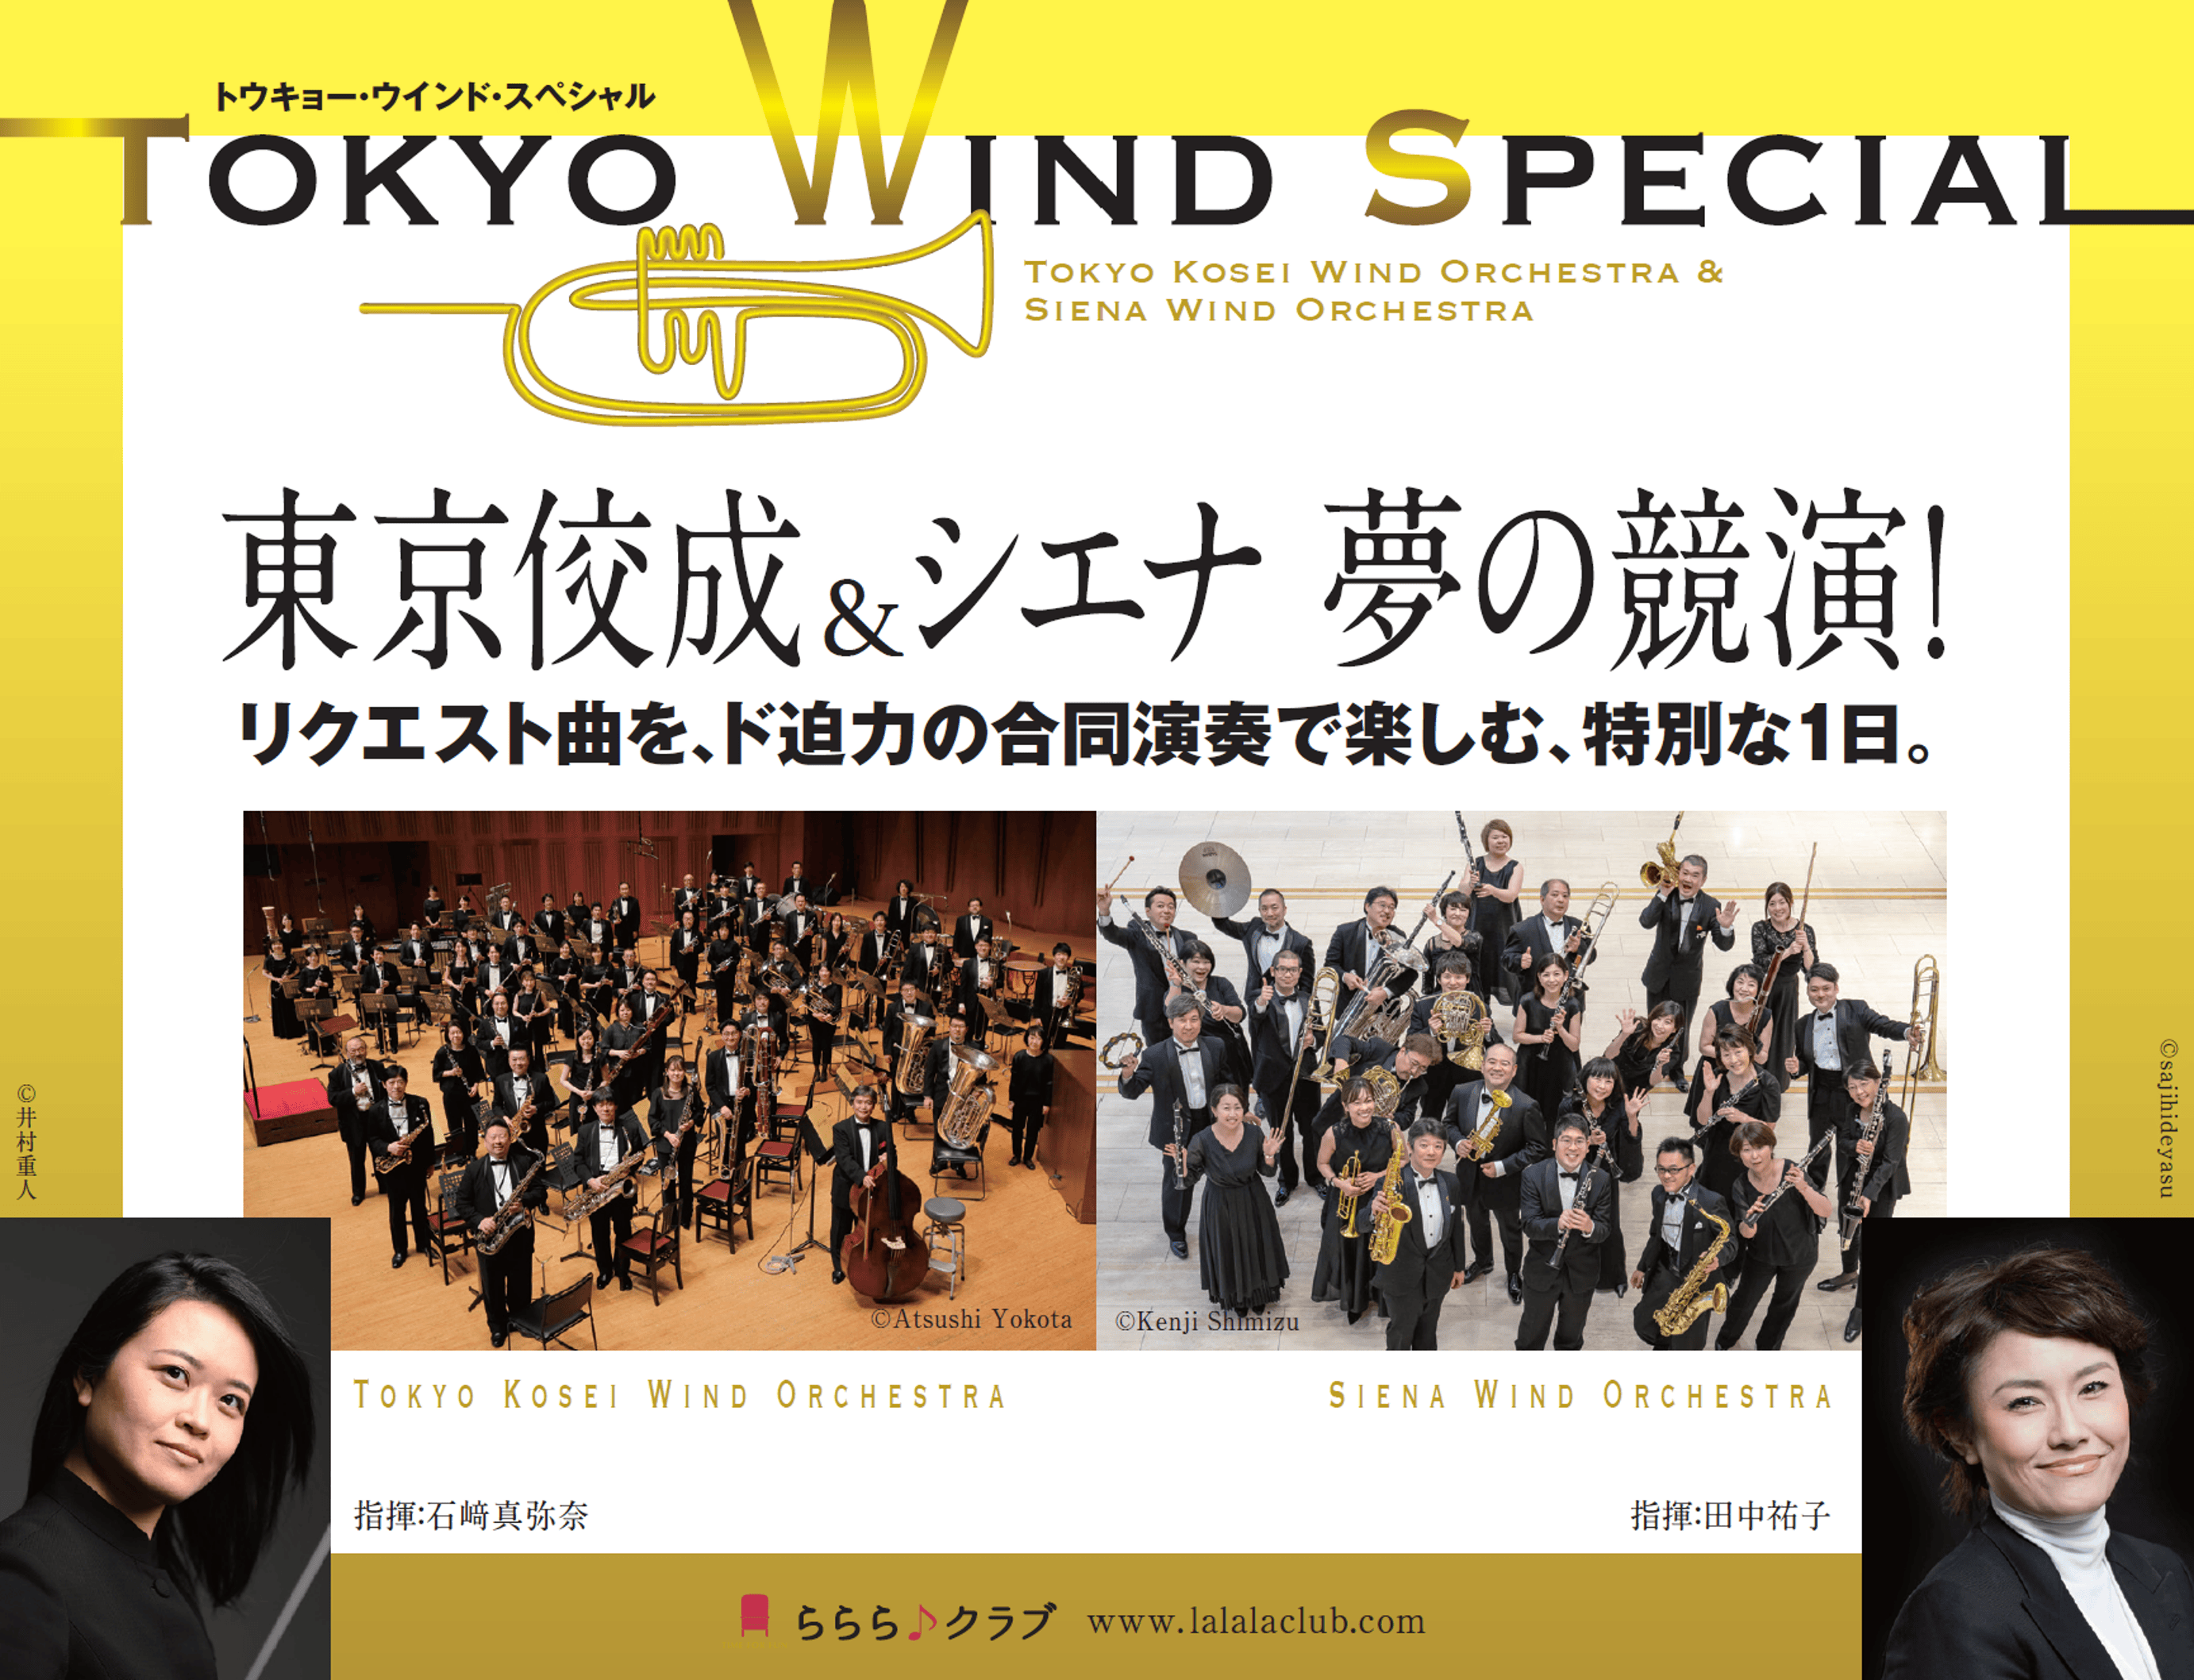 TOKYO WIND SPECIAL　東京佼成＆シエナ 夢の競演！